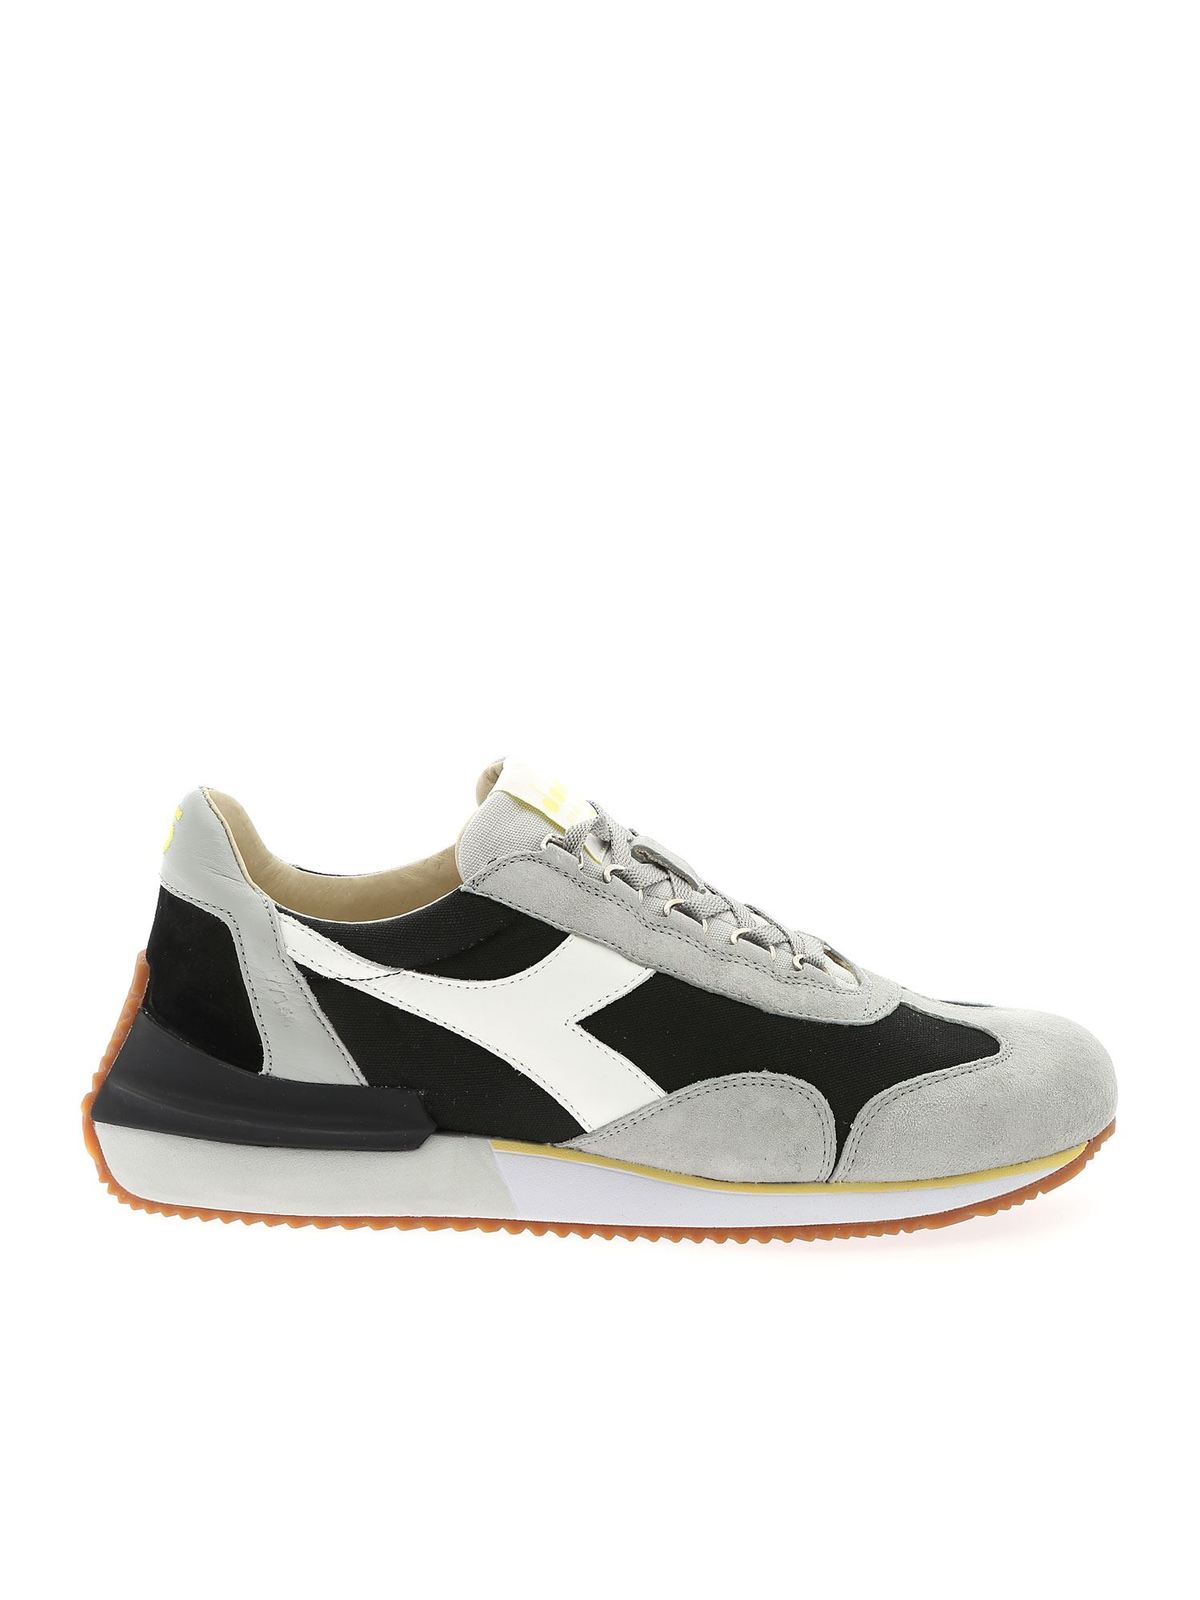 Trainers Diadora Heritage - Equipe Mad sneakers in grey and black ...